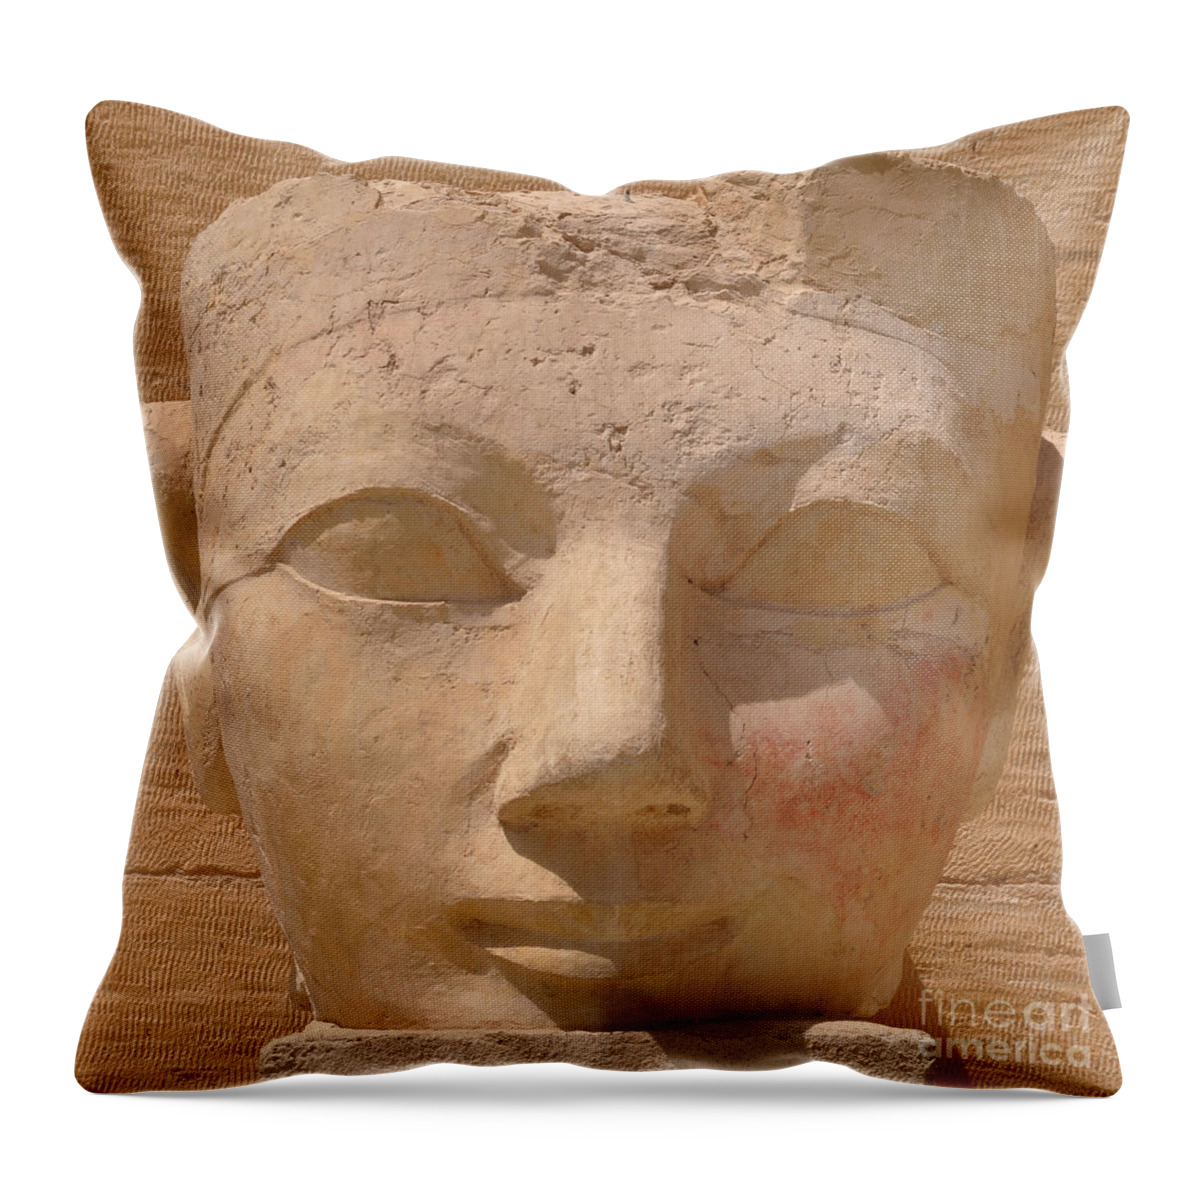 Egypt Throw Pillow featuring the photograph Queen Hatshepsut by Stevyn Llewellyn